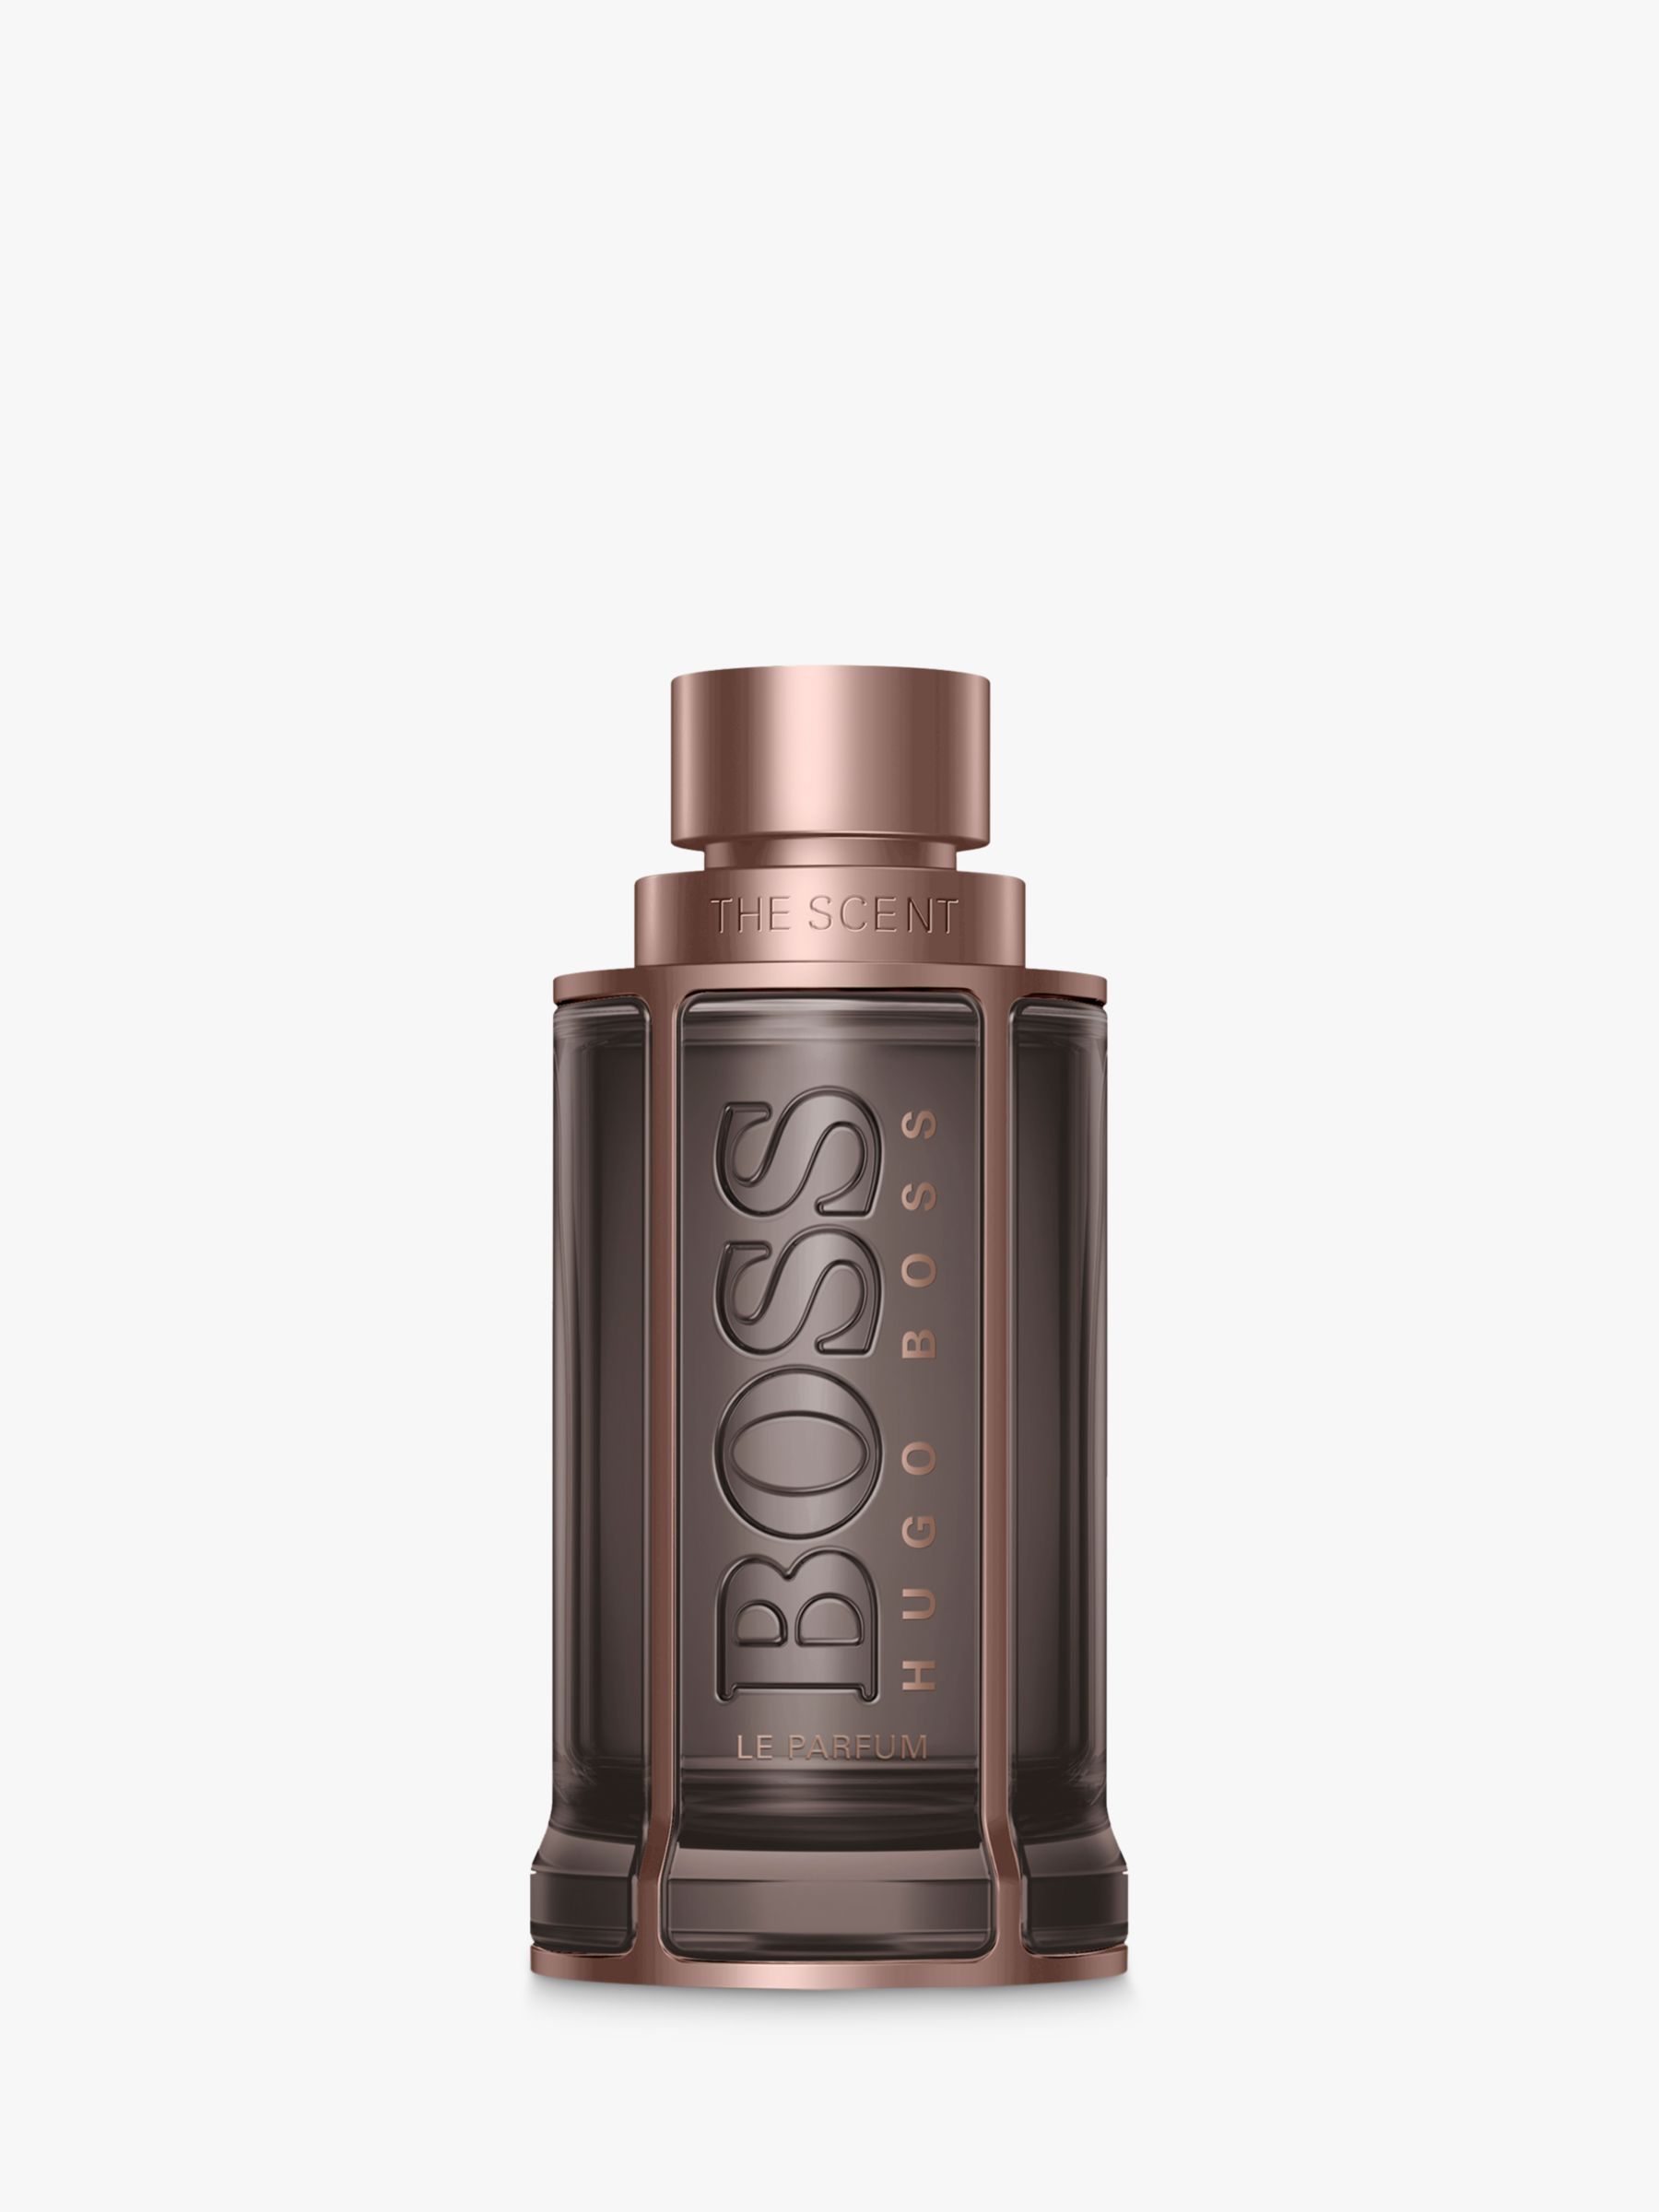 HUGO BOSS The Scent Le Parfum for 50ml at John Lewis & Partners